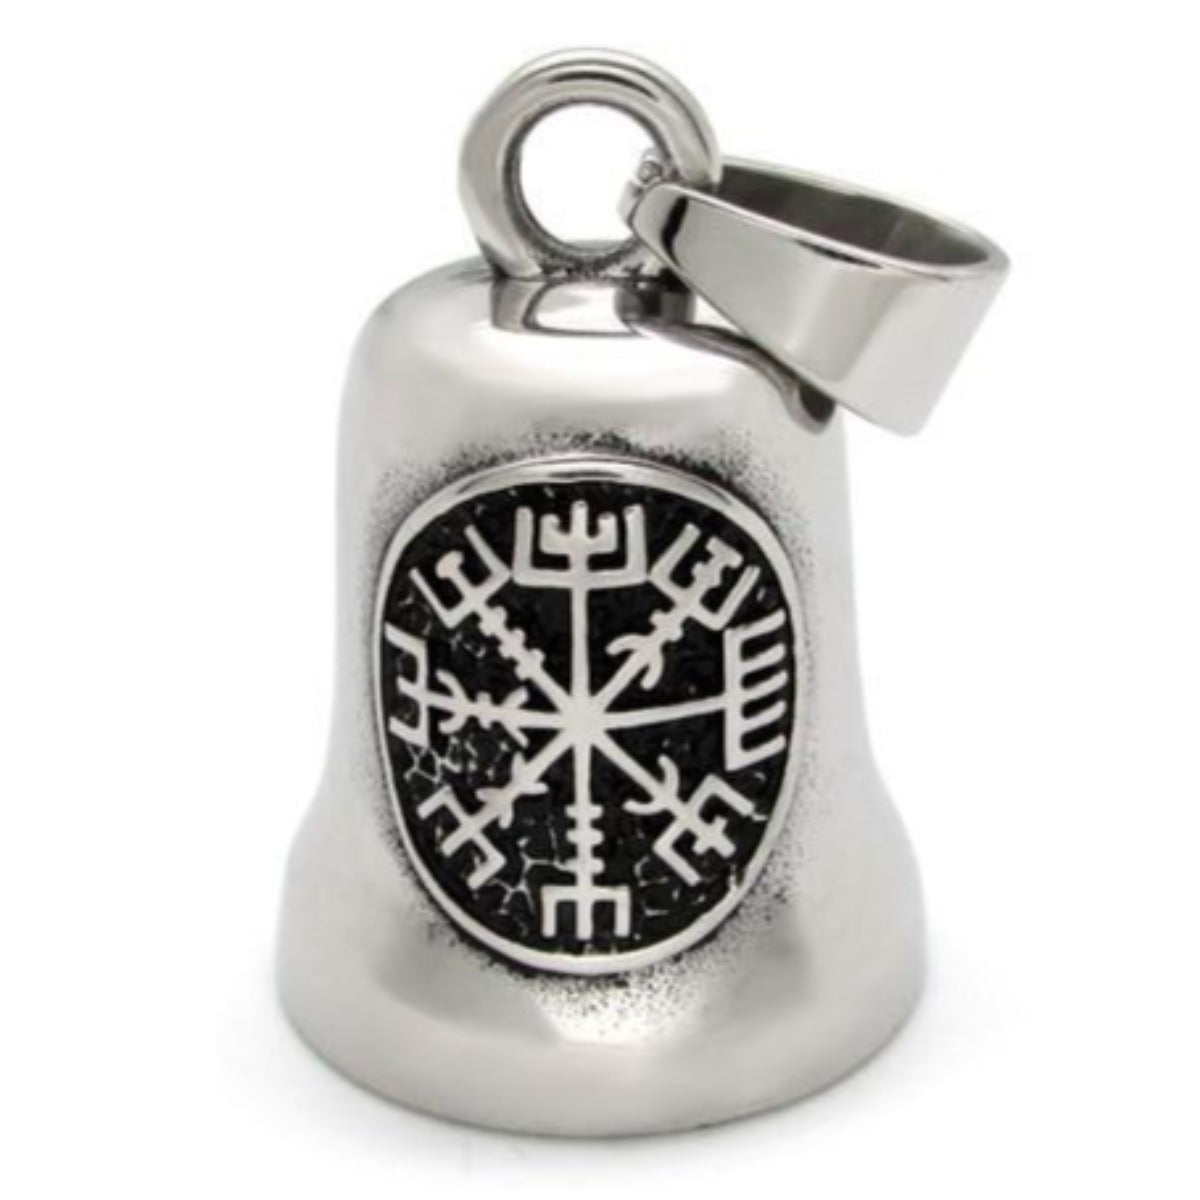 A Stainless Steel Viking Compass Gremlin Bell with a Viking-like emblem displayed on its surface.